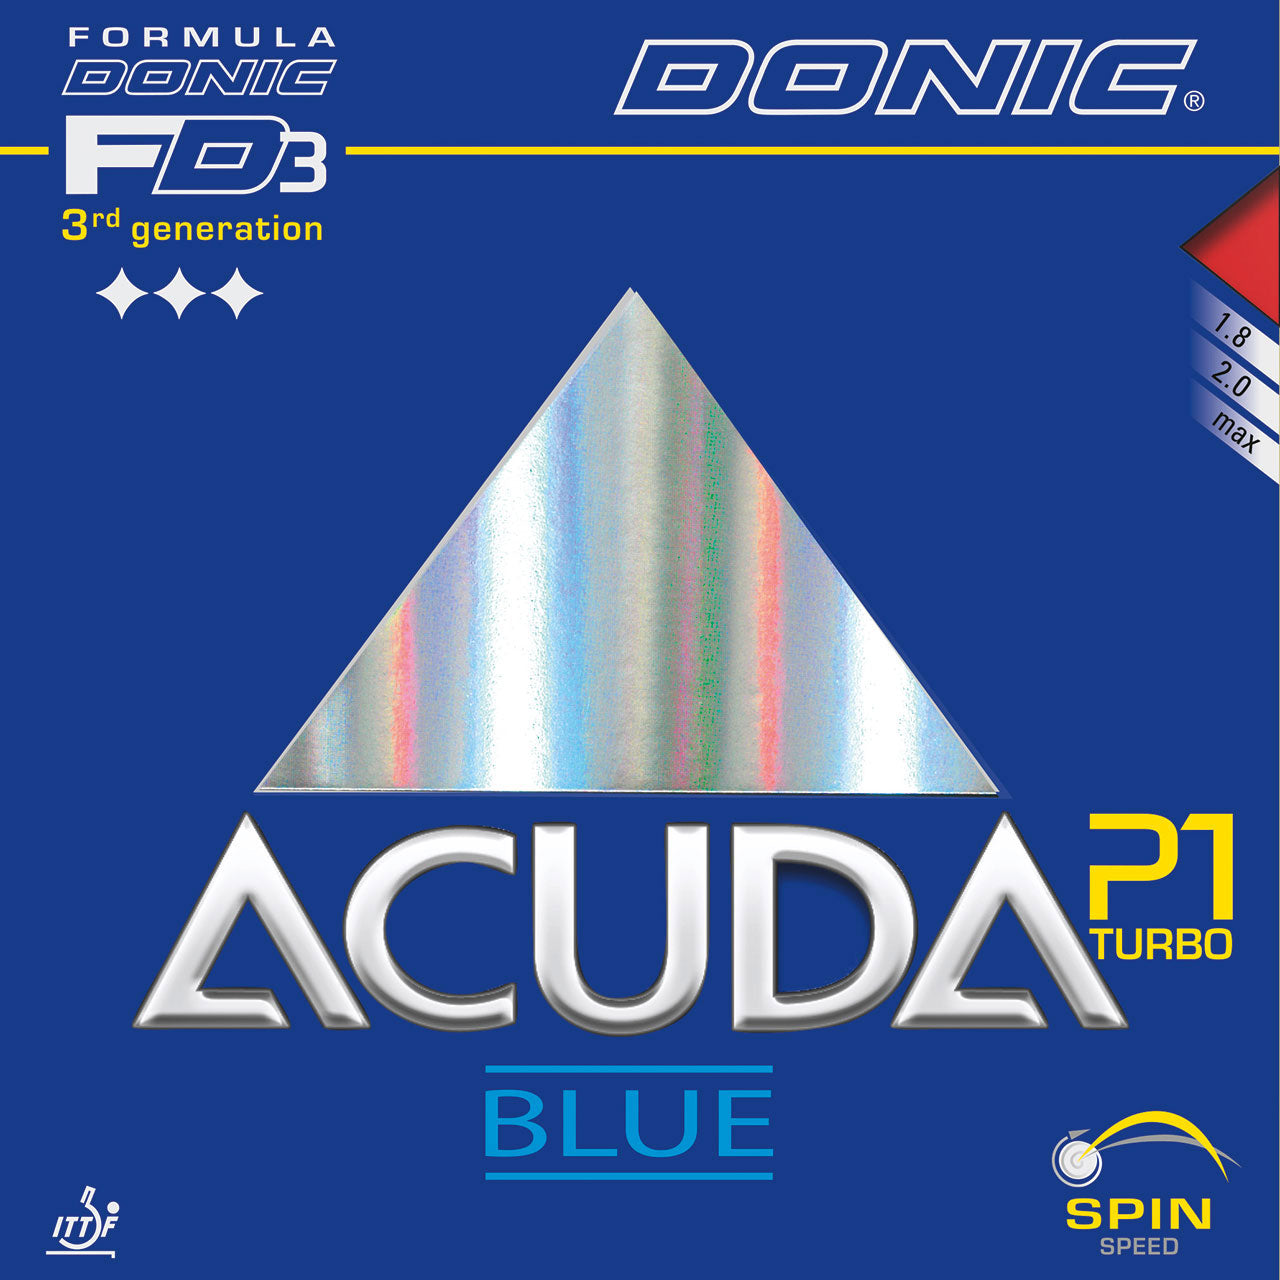 Donic Acuda Blue P1 Turbo - Killypong